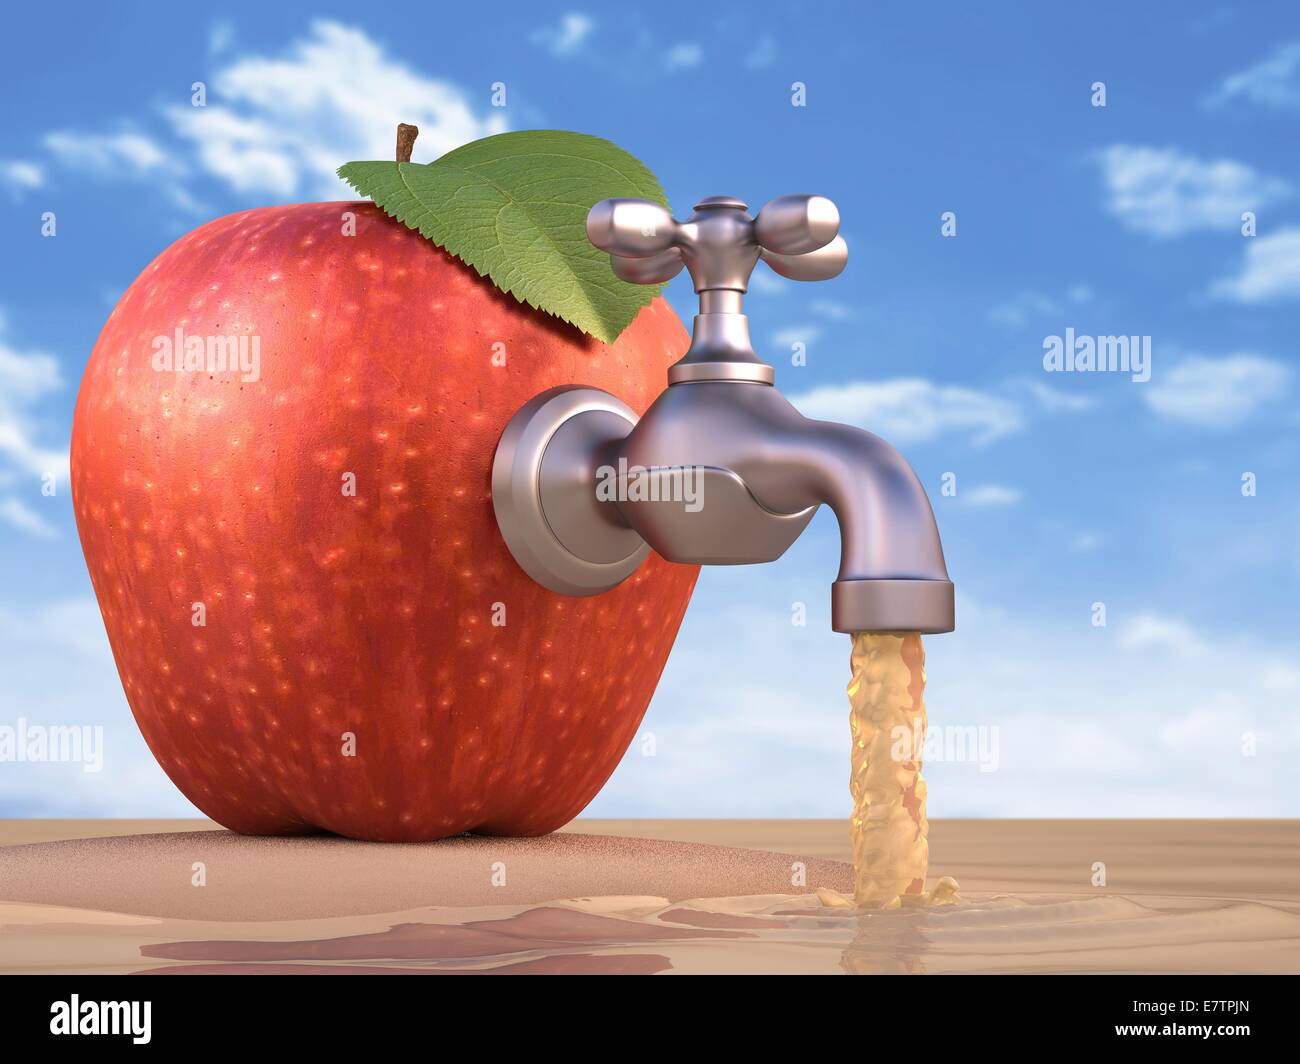 Red apple with a tap, conceptual artwork. Stock Photo